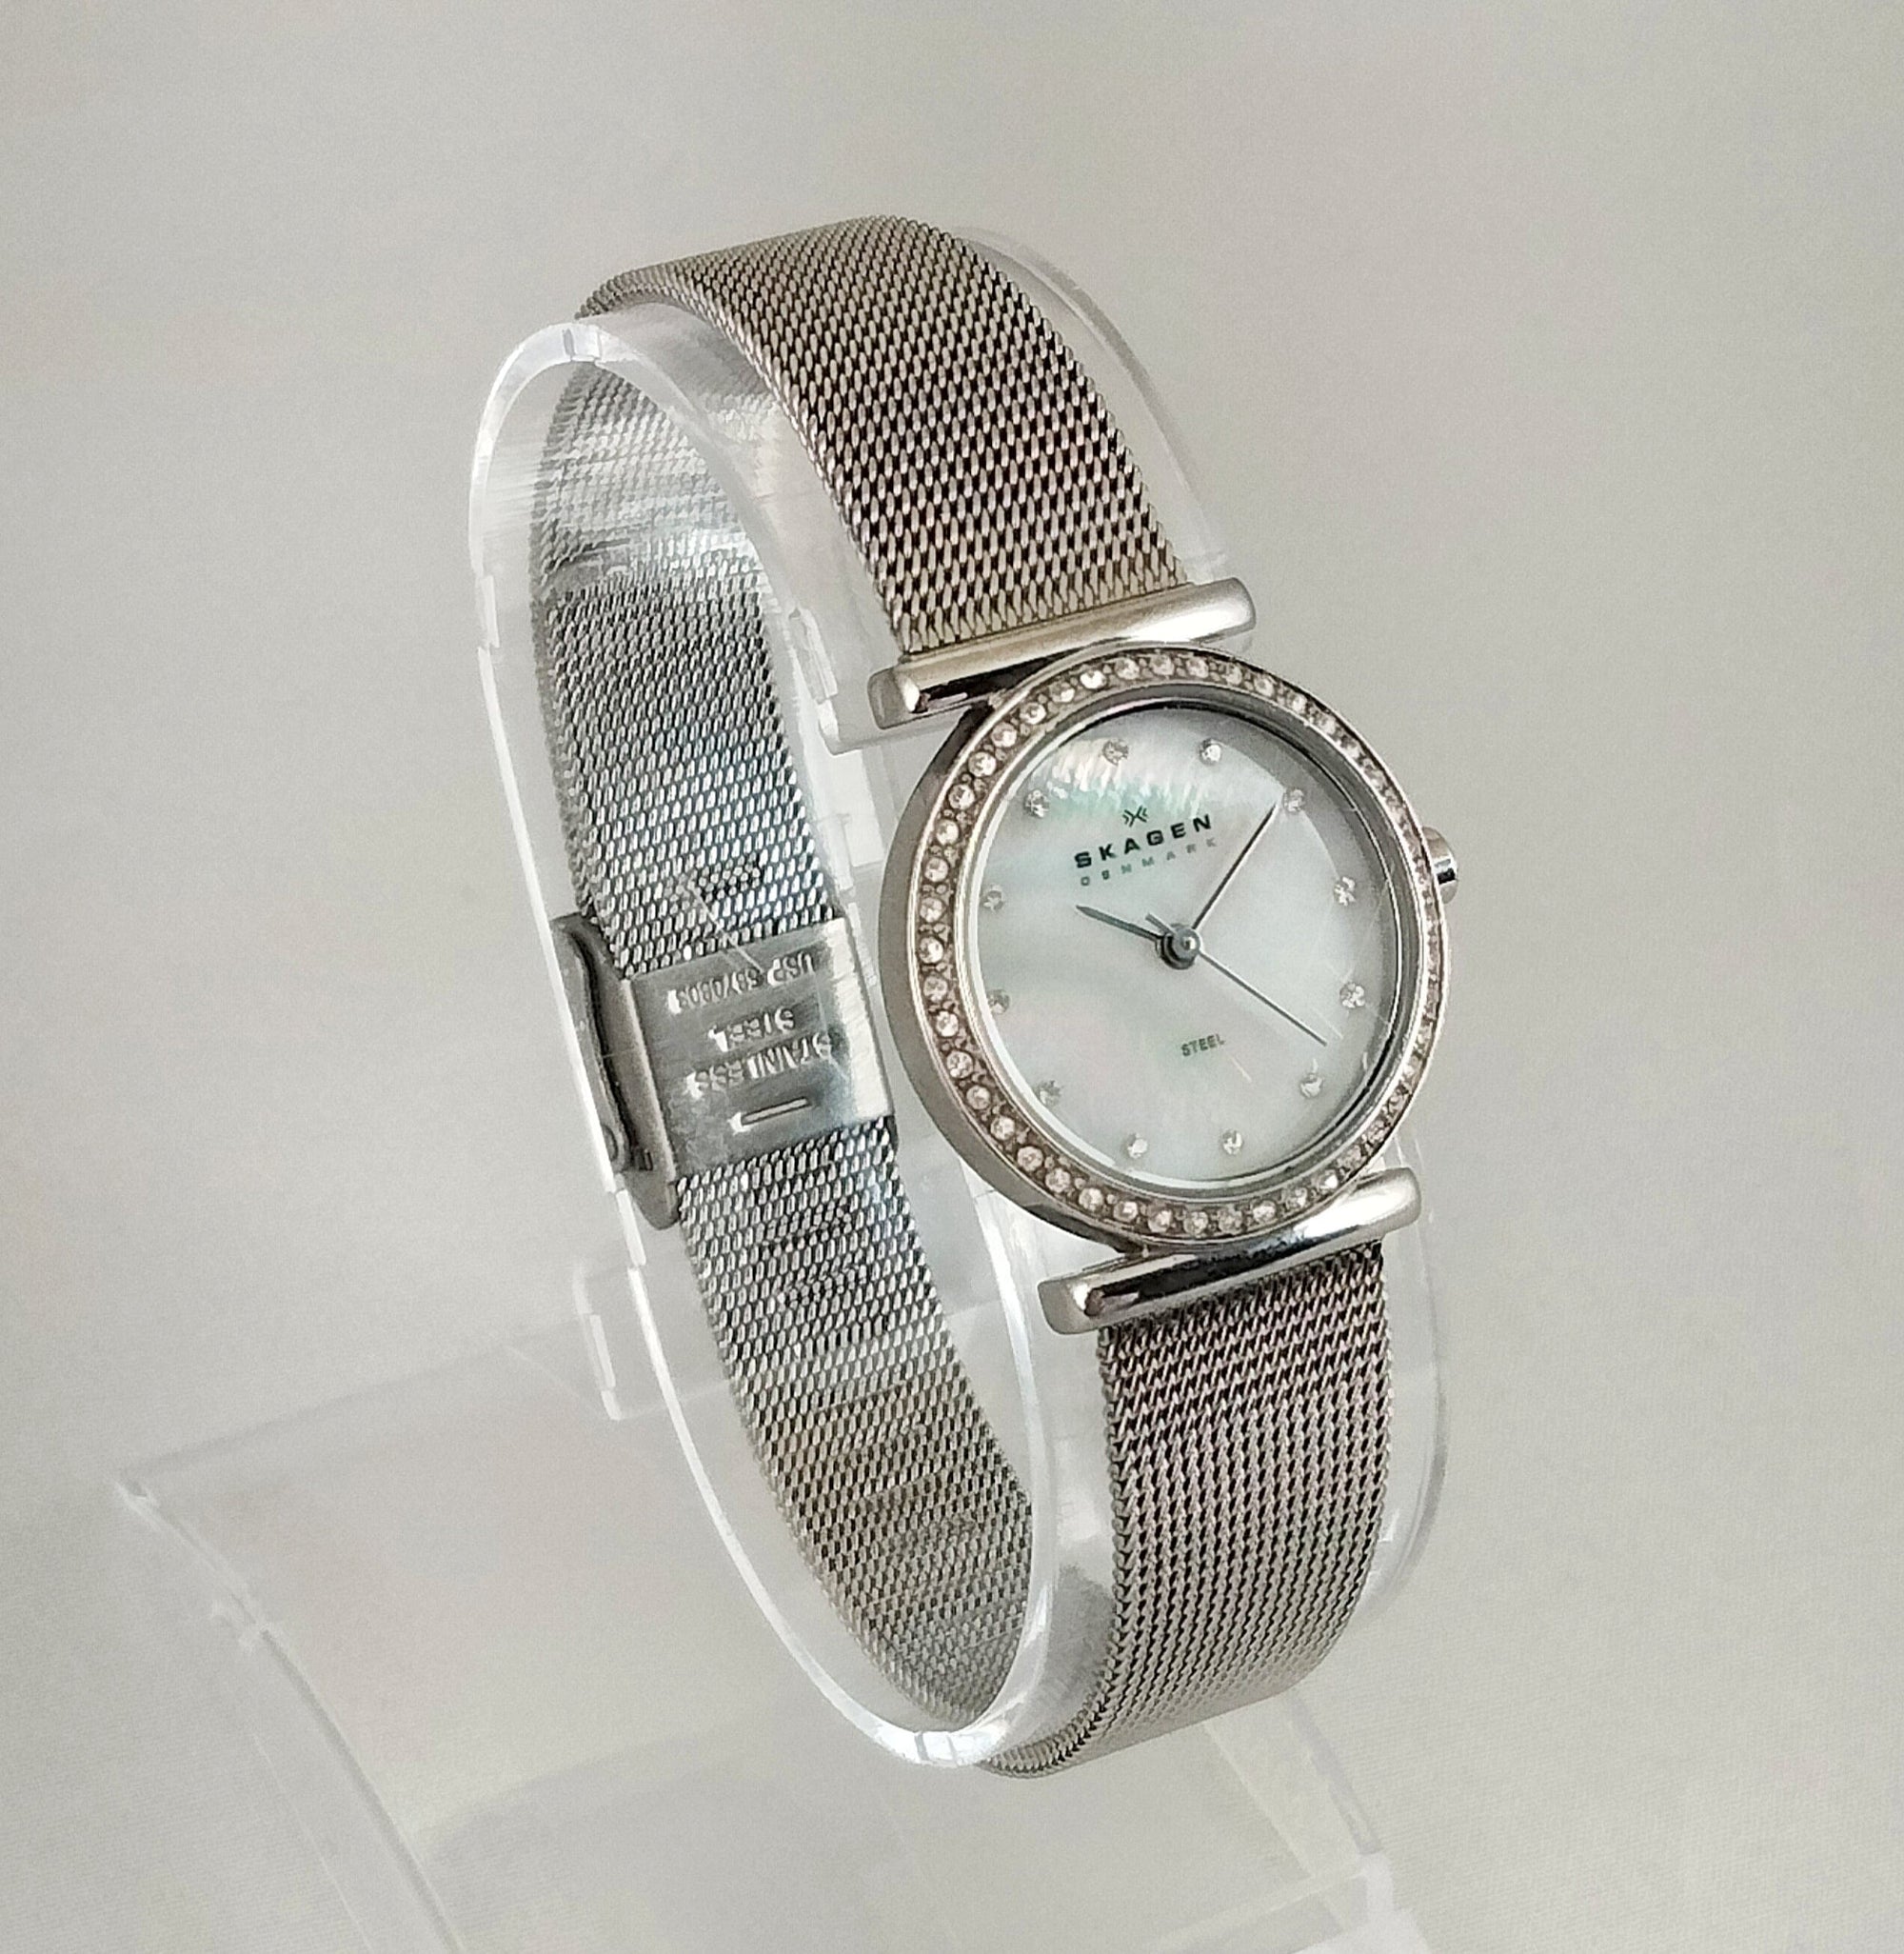 I Like Mikes Mid Century Modern Watches Skagen Women's Stainless Steel Watch, Mother of Pearl Dial, Jewel Hour Markers and Border, Mesh Strap